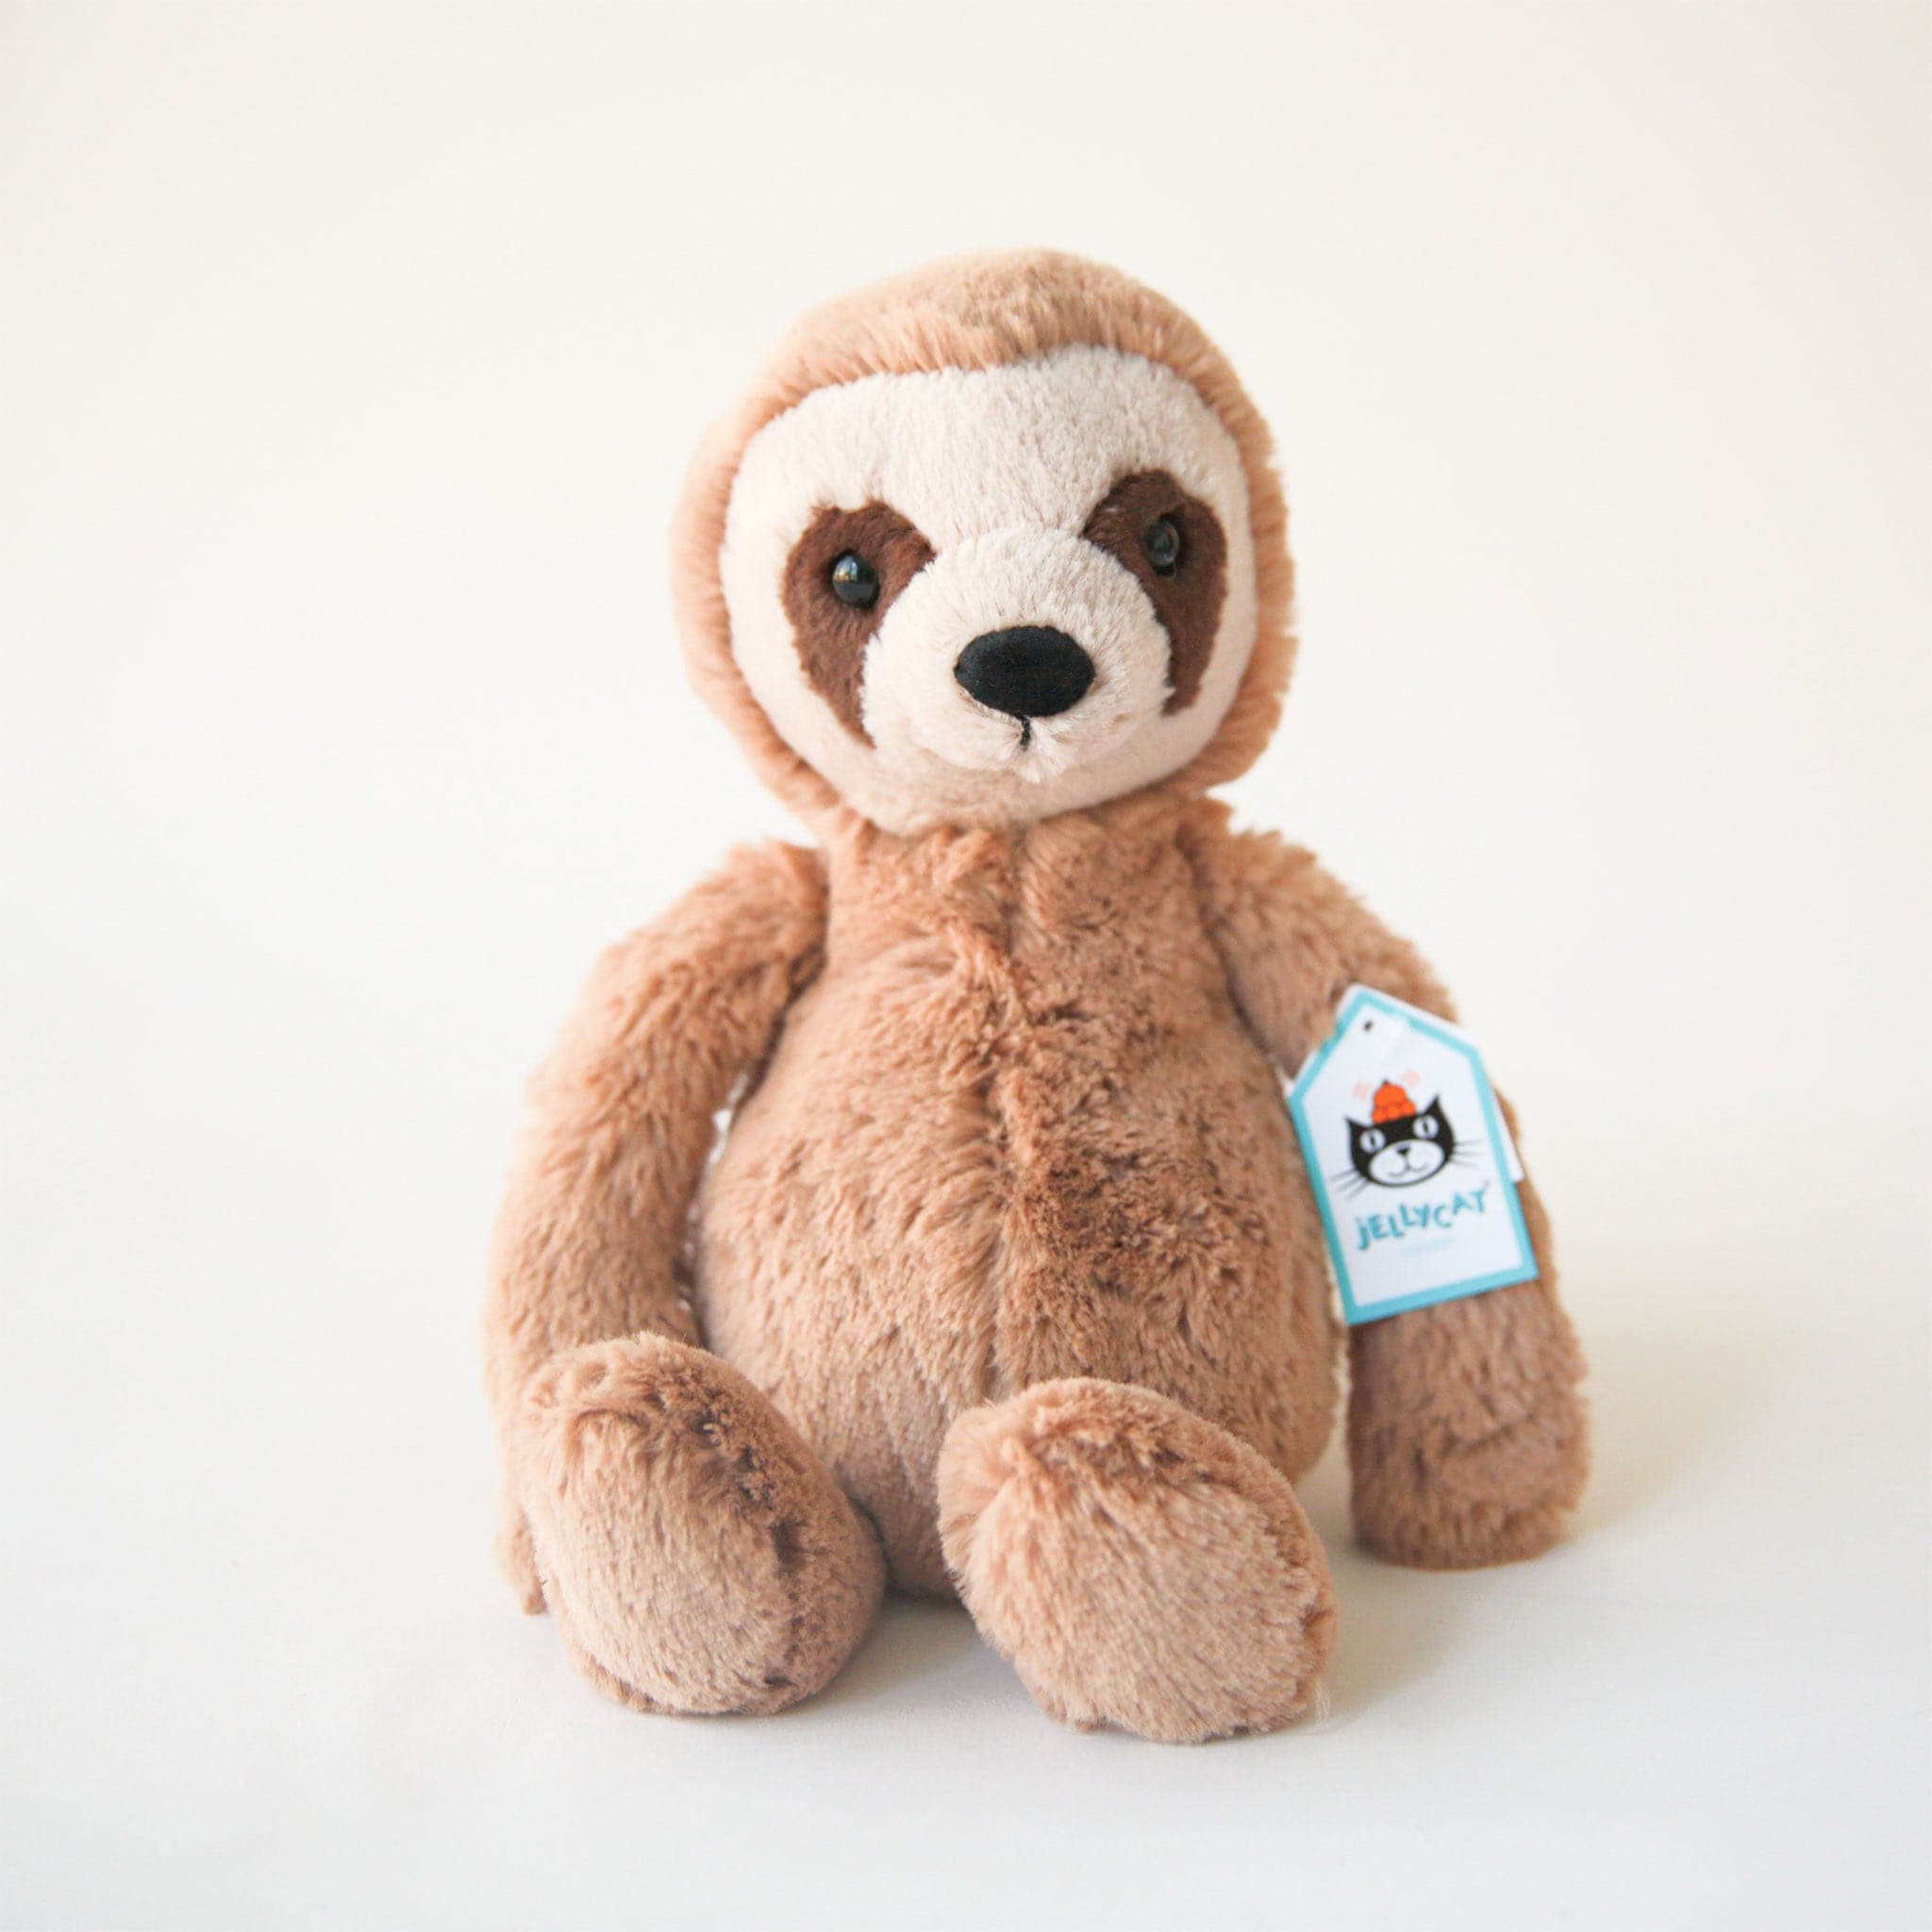 A fuzzy brown sloth stuffed animal with darker brown markings around his eyes, a cream colored face and a black nose.